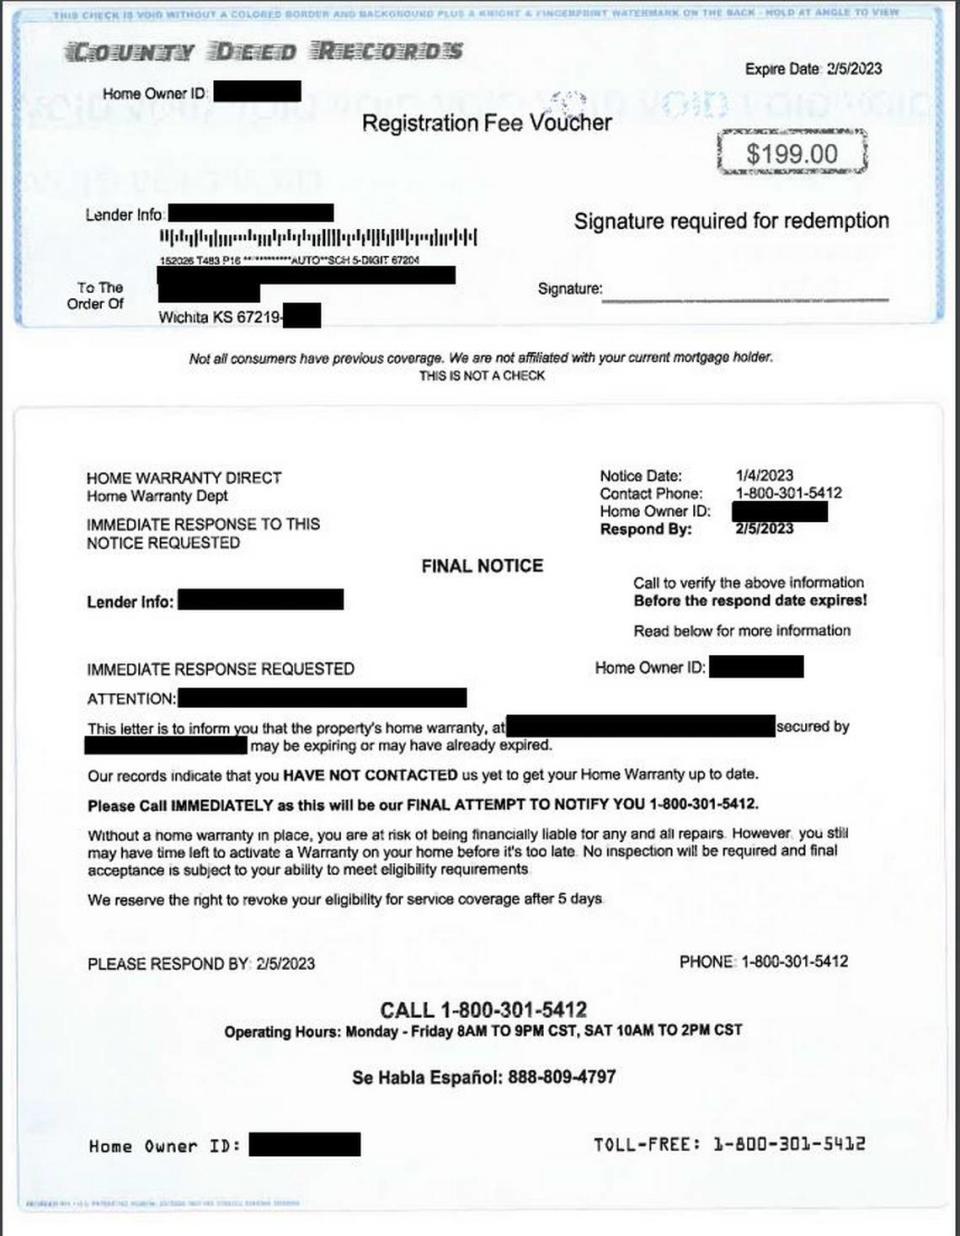 This is an example of what a local official says is a scam letter trying to convince people to buy a home warranty. Personal information from the homeowner, which was included in the letter, has been redacted.